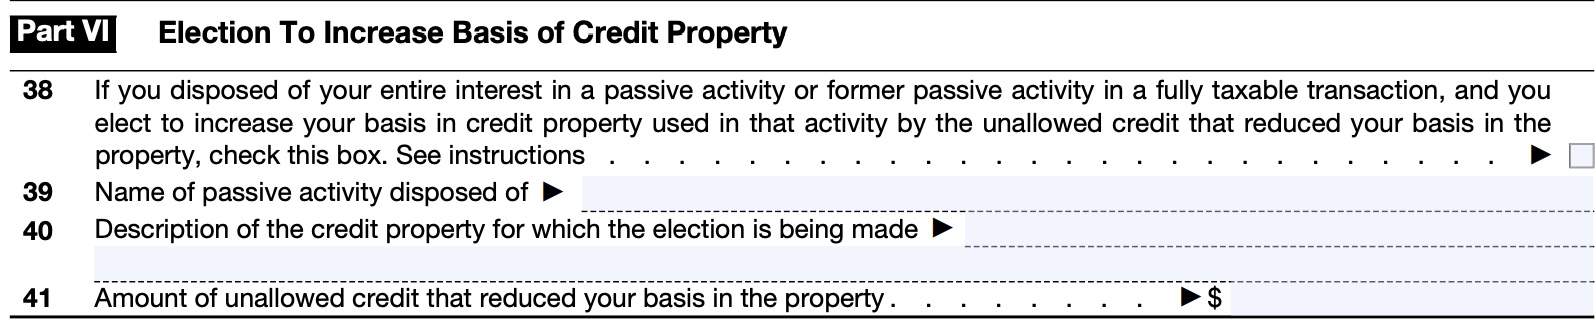 IRS form 8582-CR, Part VI, election to increase basis of credit property